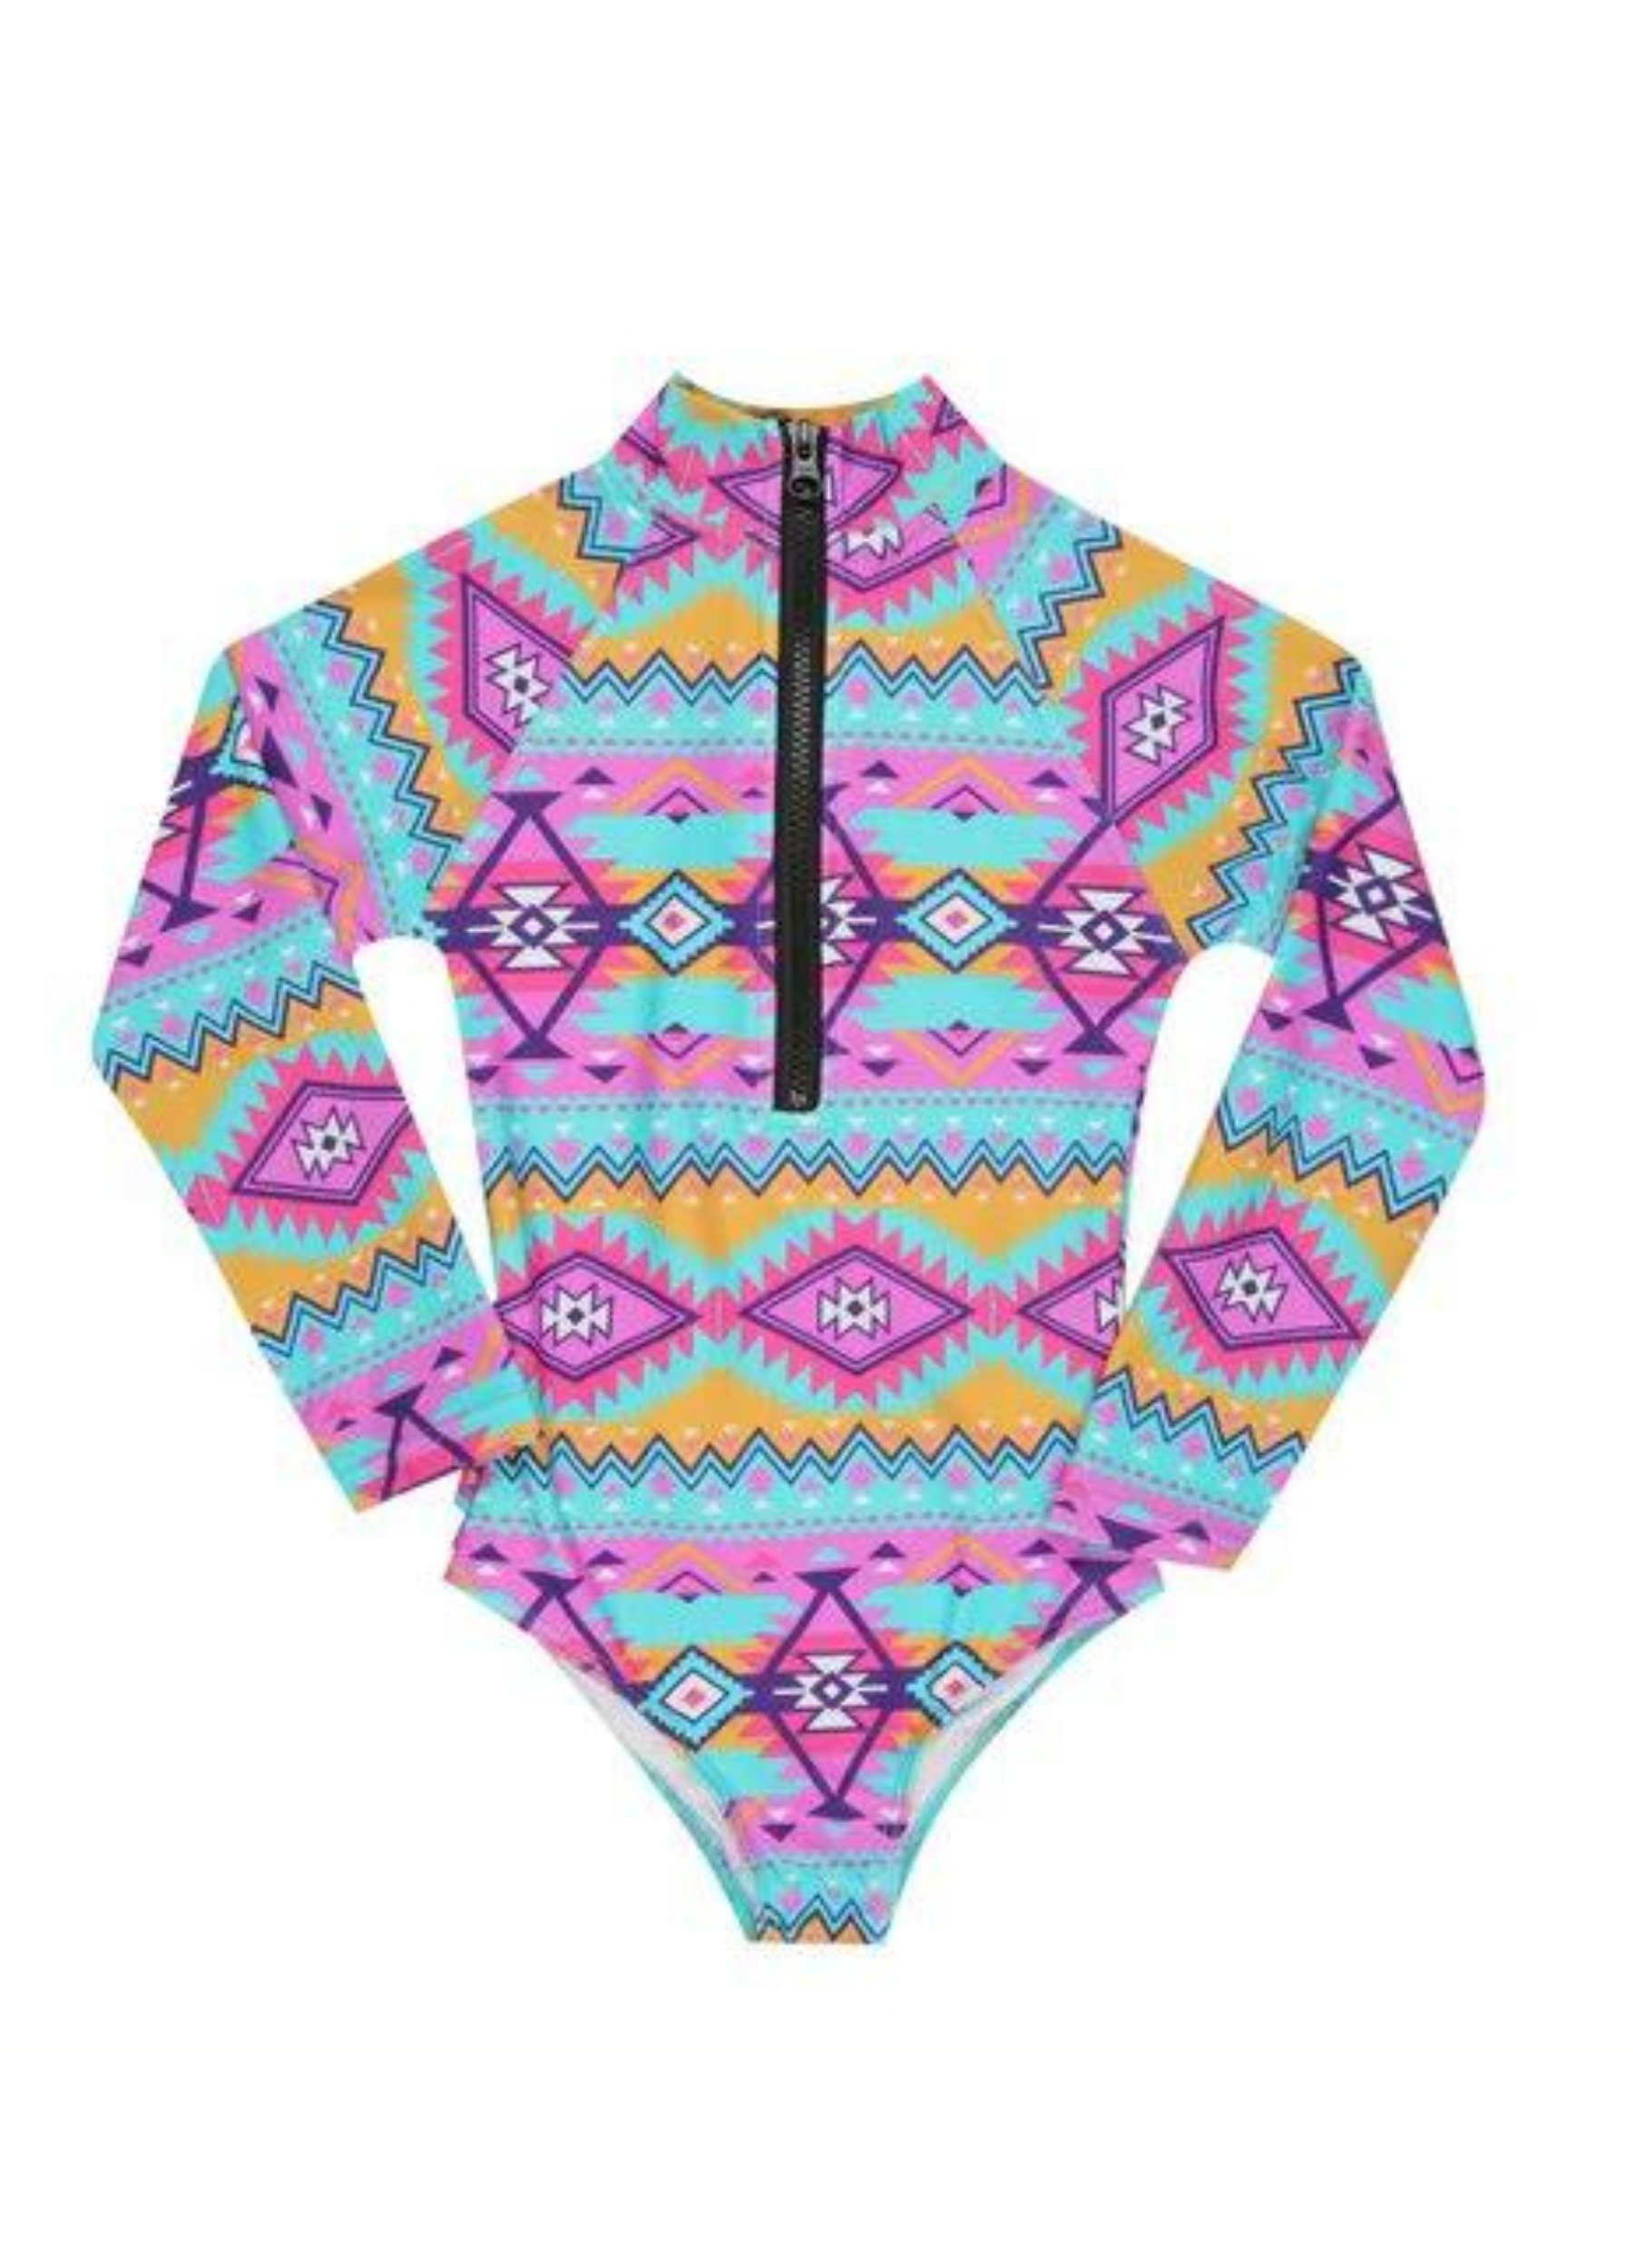 Tozi Blake surf suit from Infamous Swim